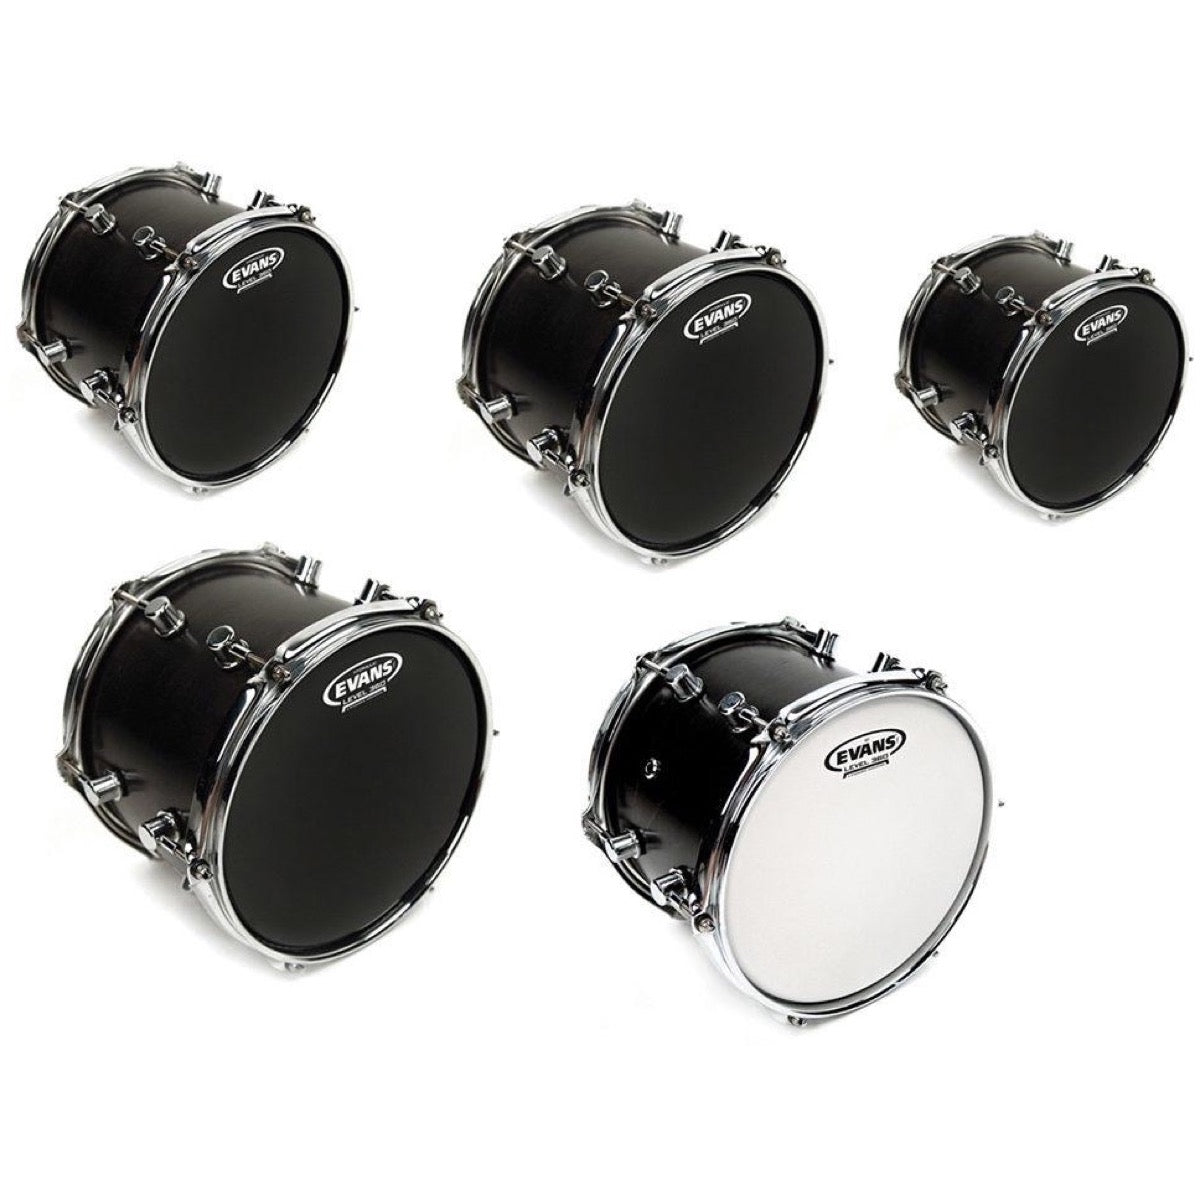 Evans Black Drumhead, Tom Pack: 10, 12, and 16 Inch Heads, with 14 Inch G1